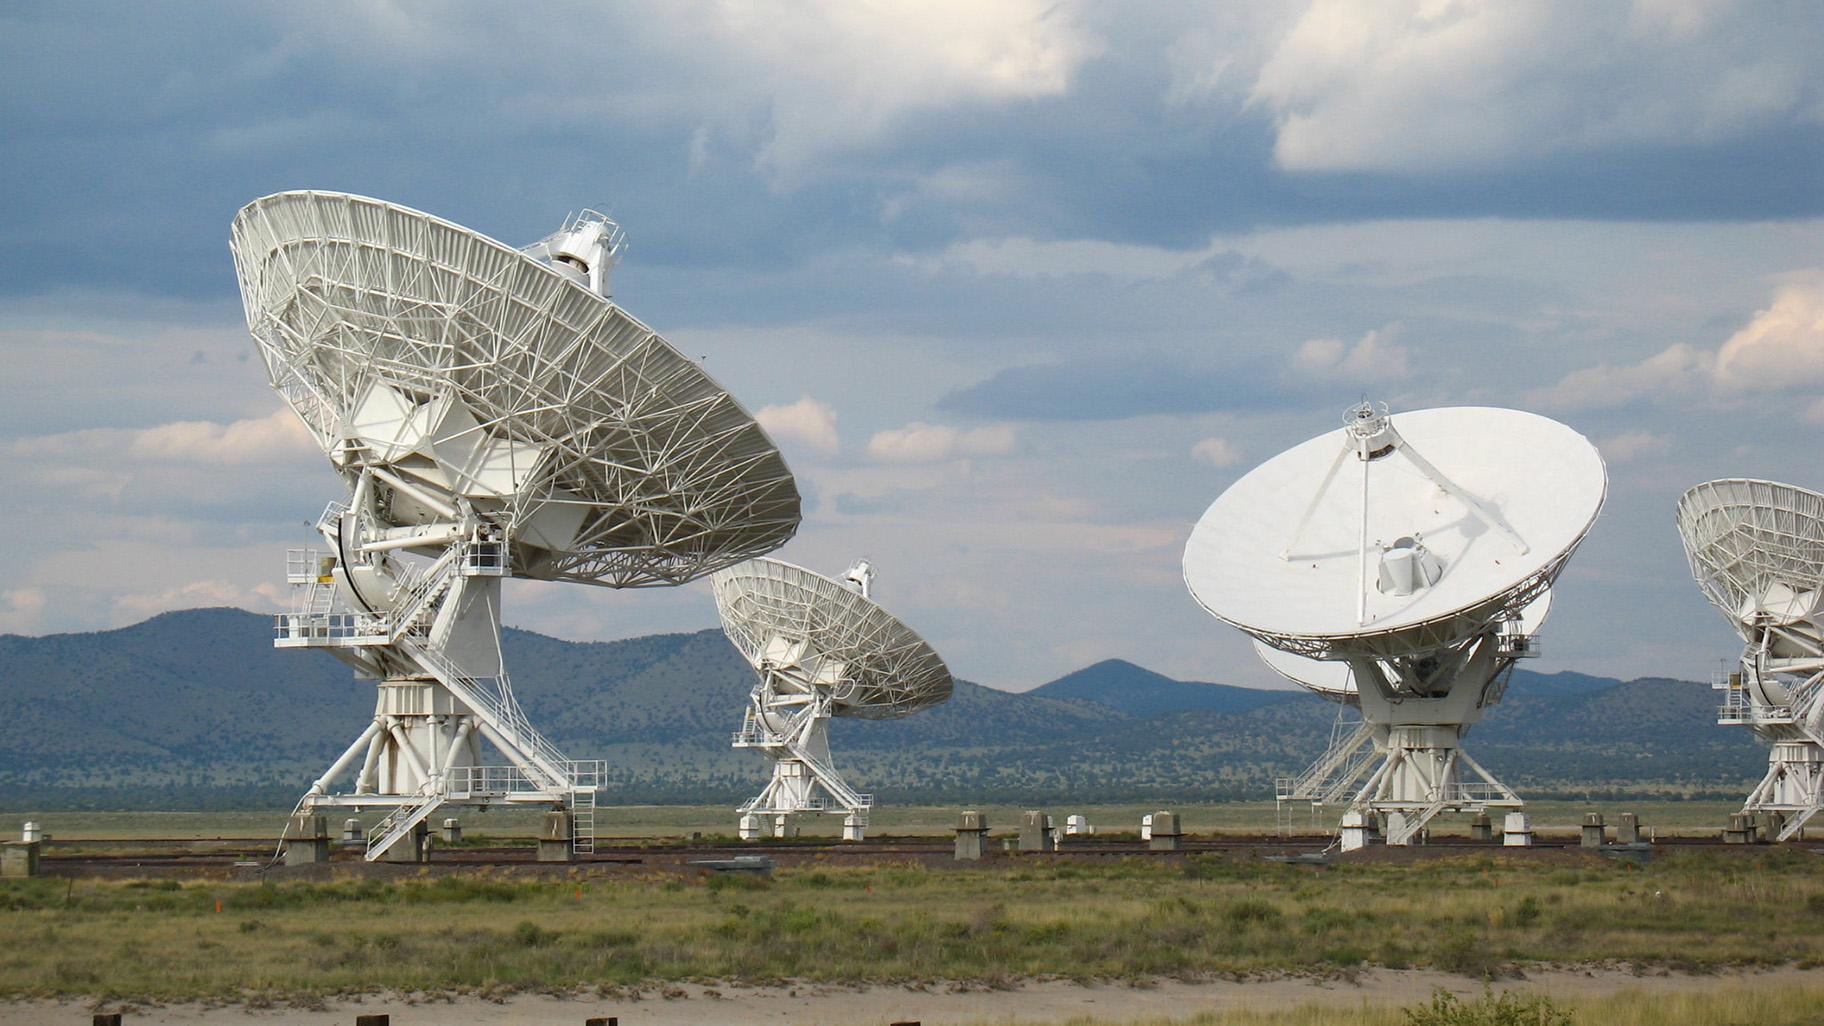 The Very Large Array (VLA) is a collection of 27 radio antennas located at the NRAO site in Socorro, New Mexico. Each antenna in the array measures 82 feet in diameter and weighs about 230 tons. (Photo: Luke Jones / Flickr)